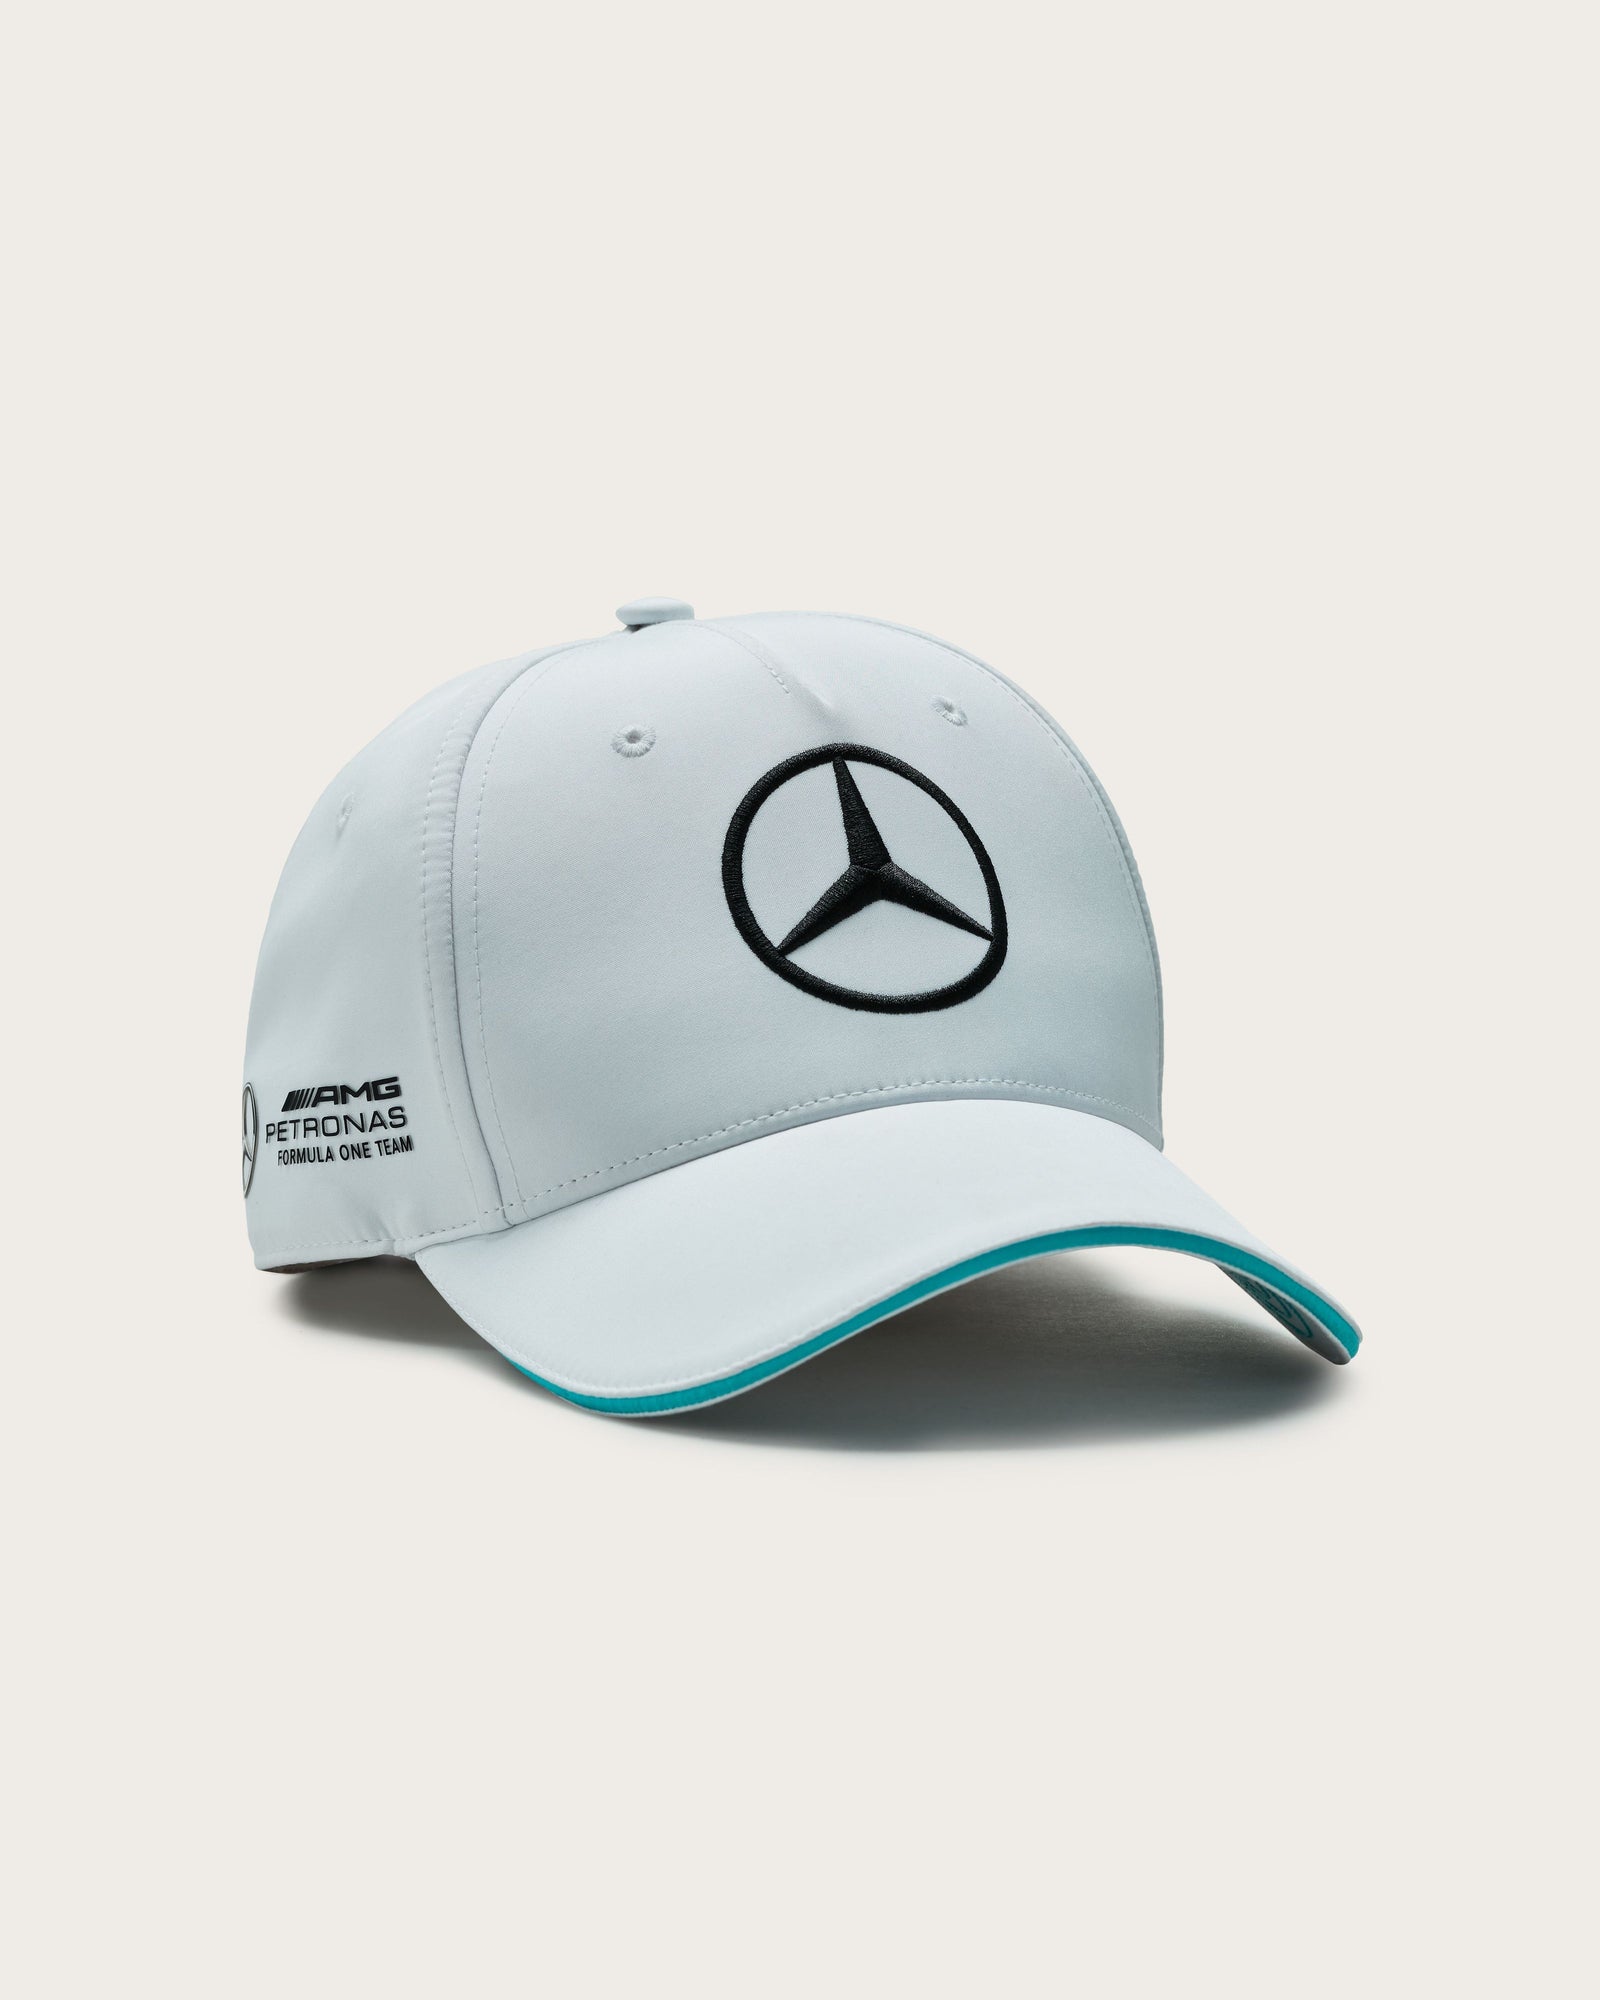 Mercedes F1 & Driver | Official Mercedes-AMG F1 Store